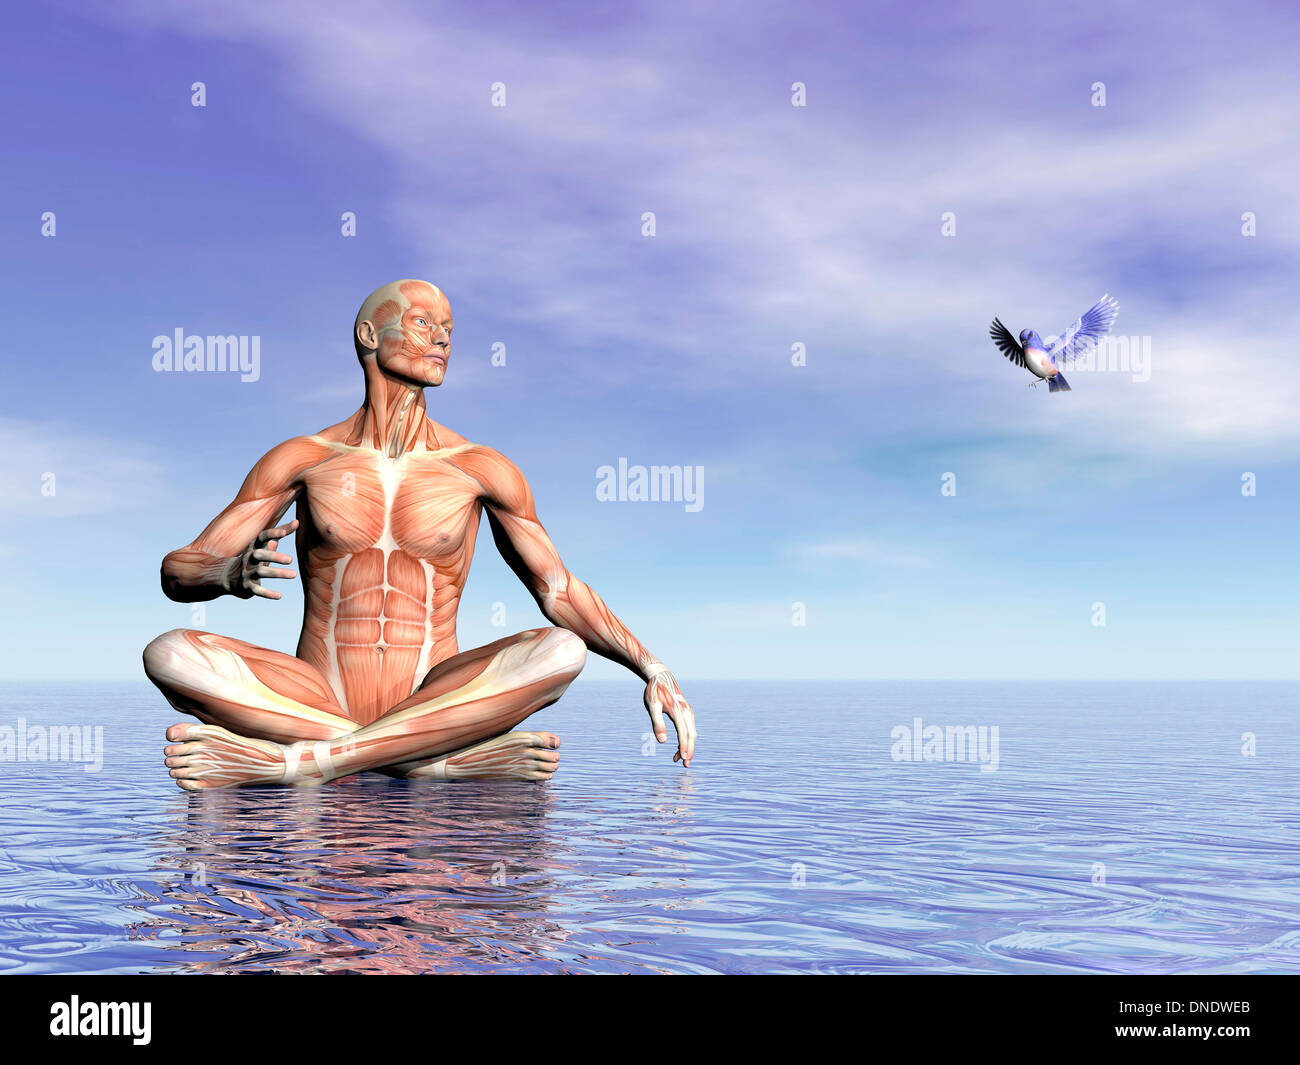 Male musculature in lotus position on water while looking at a beautiful little bird flying. Stock Photo